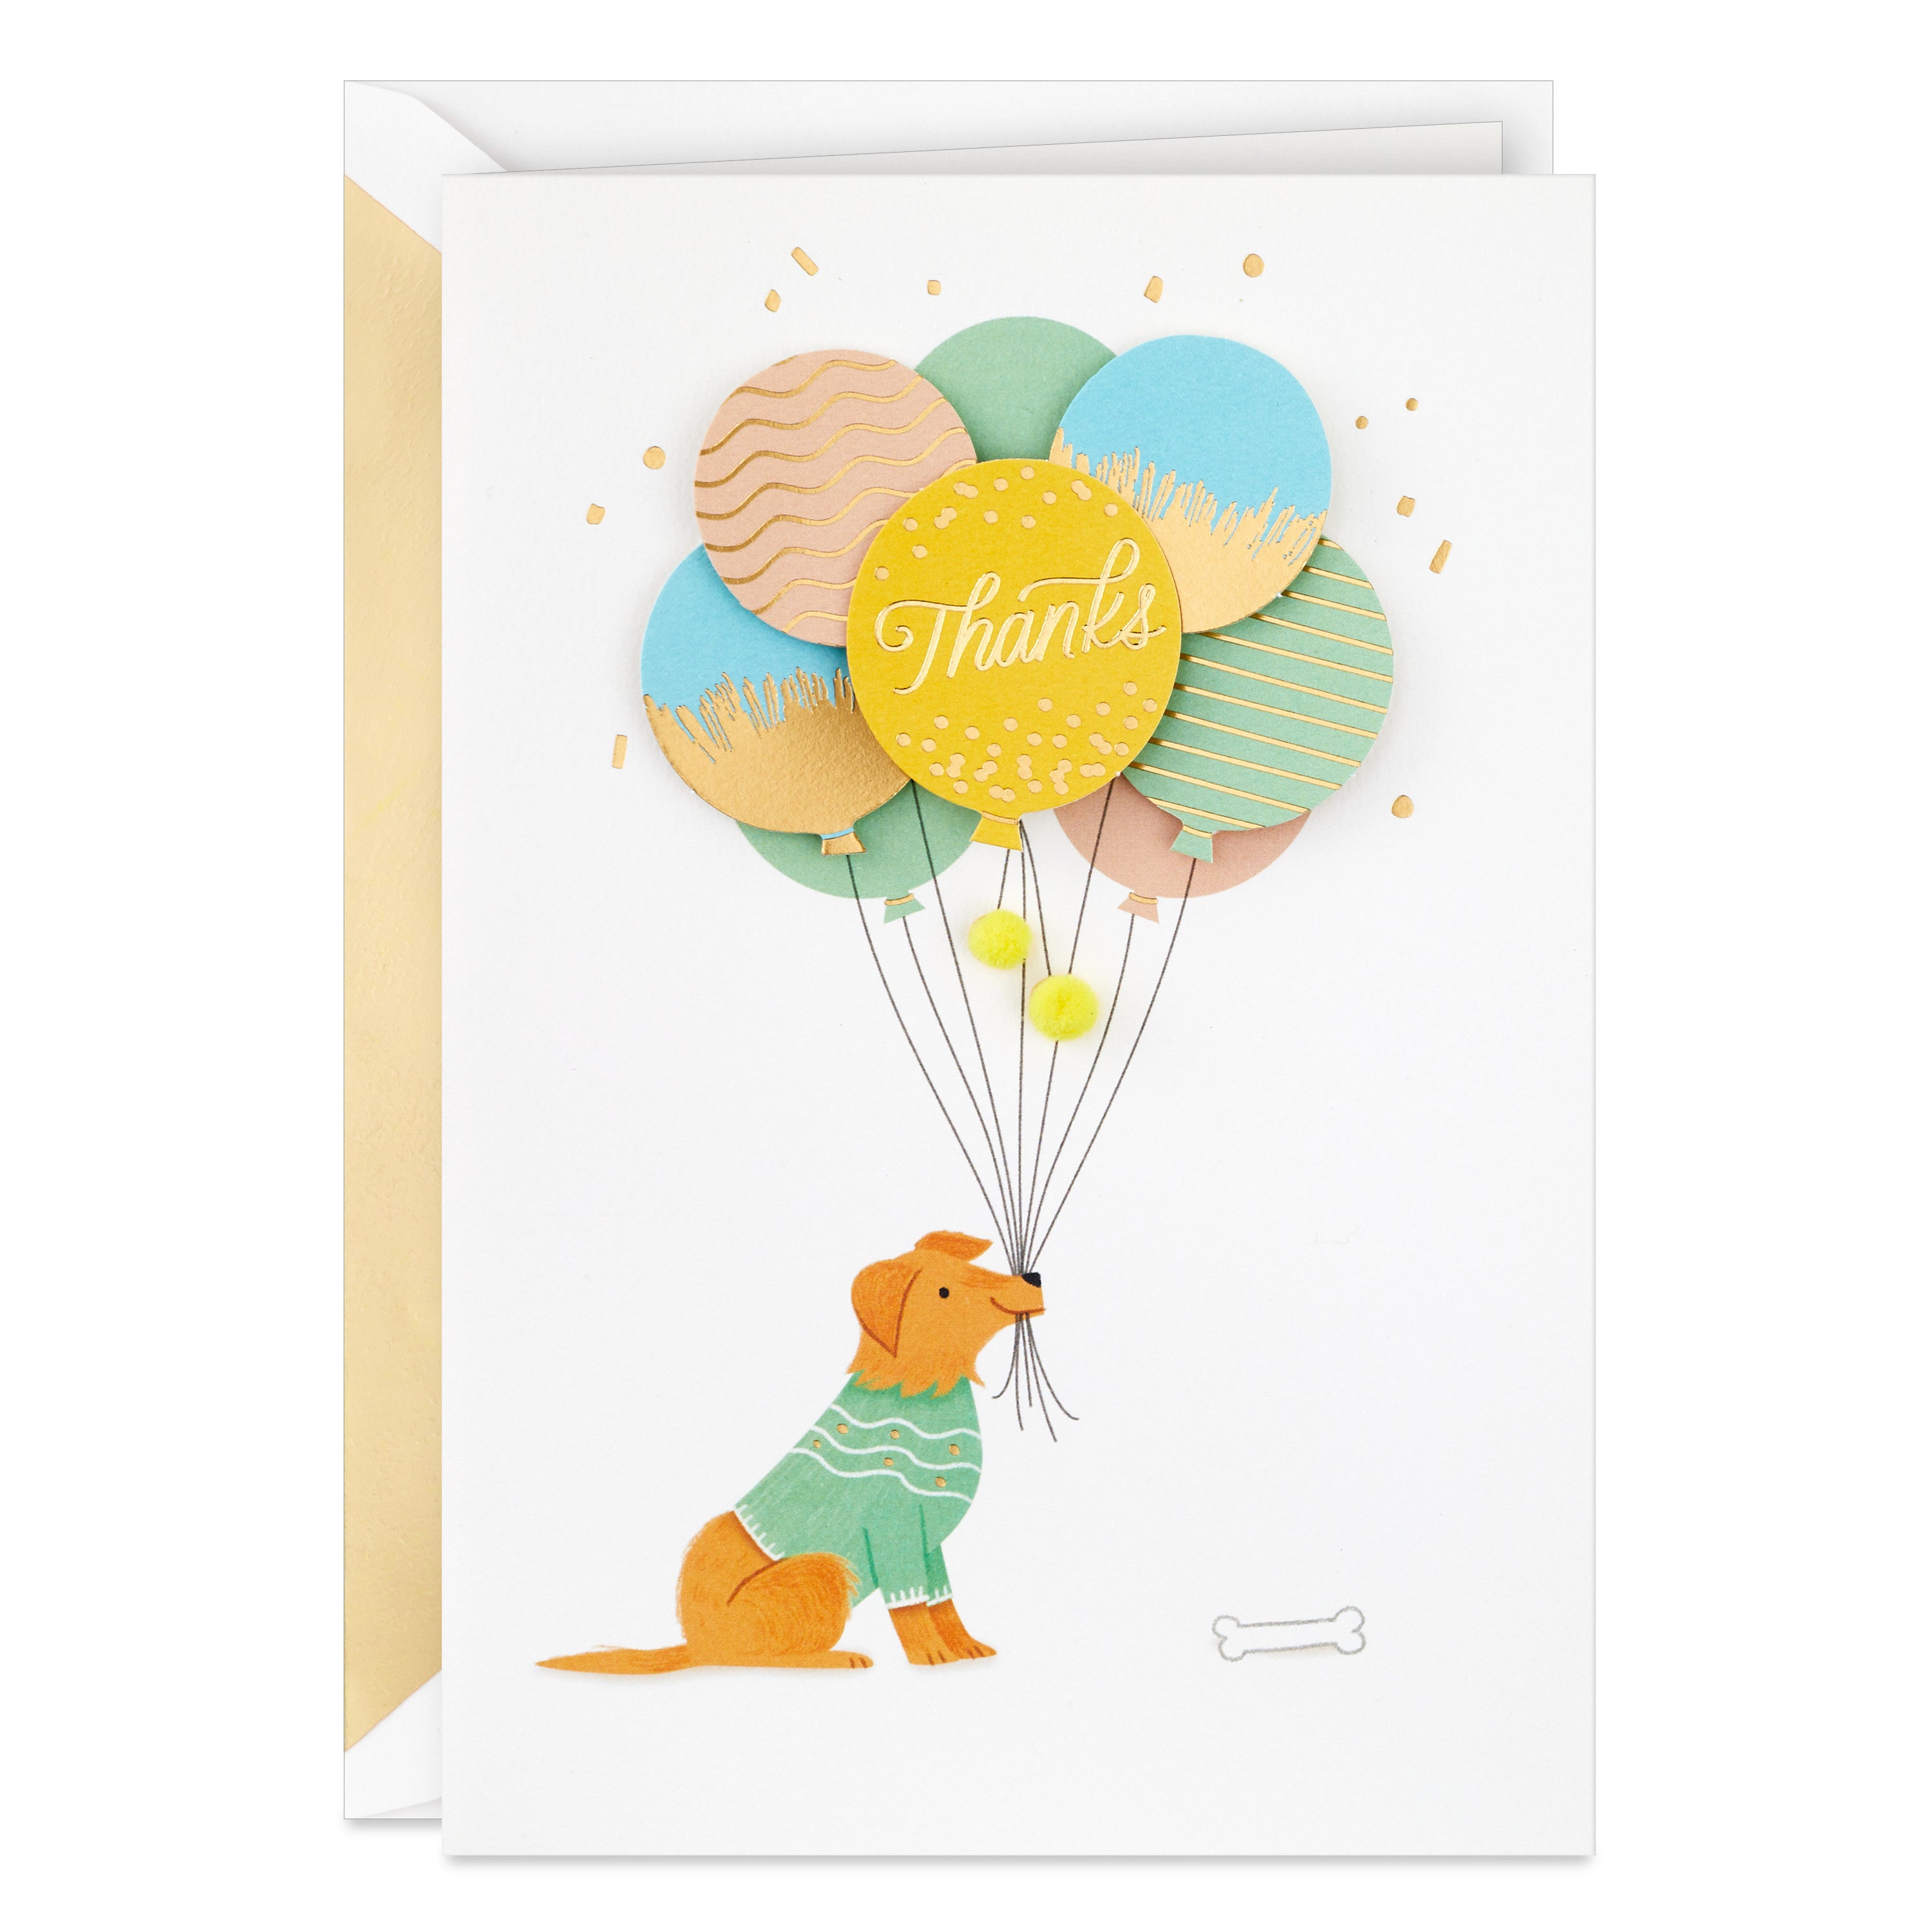 Hallmark Signature Thank You Card, Admin Professional Day Card (Dog with Balloons)